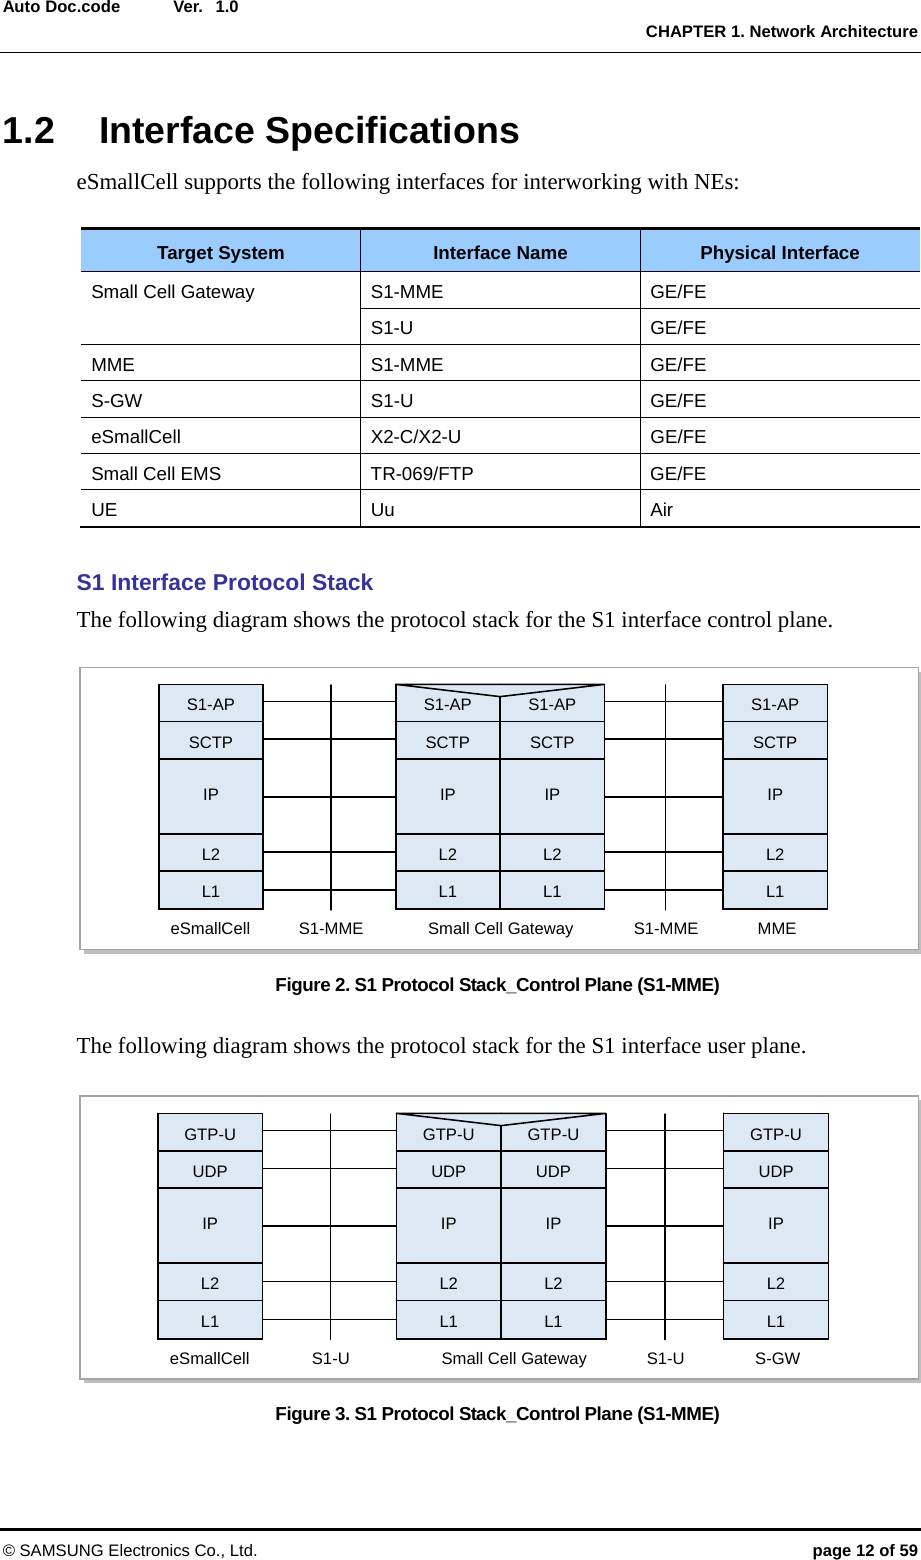  Ver.   CHAPTER 1. Network Architecture © SAMSUNG Electronics Co., Ltd.  page 12 of 59 Auto Doc.code  1.01.2 Interface Specifications eSmallCell supports the following interfaces for interworking with NEs:  Target System  Interface Name  Physical Interface Small Cell Gateway S1-MME GE/FE S1-U GE/FE MME S1-MME GE/FE S-GW S1-U  GE/FE eSmallCell X2-C/X2-U GE/FE Small Cell EMS    TR-069/FTP  GE/FE UE Uu Air  S1 Interface Protocol Stack The following diagram shows the protocol stack for the S1 interface control plane.  Figure 2. S1 Protocol Stack_Control Plane (S1-MME)  The following diagram shows the protocol stack for the S1 interface user plane.  Figure 3. S1 Protocol Stack_Control Plane (S1-MME) GTP-UUDPIP L2L1GTP-UUDPIP L2L1GTP-U UDP IP L2 L1 GTP-UUDPIP L2L1eSmallCell  Small Cell Gateway  S-GW S1-U S1-U eSmallCell  Small Cell Gateway  MME S1-MME S1-MME S1-APSCTPIP L2L1S1-APSCTPIP L2L1S1-AP SCTP IP L2 L1 S1-APSCTPIP L2L1